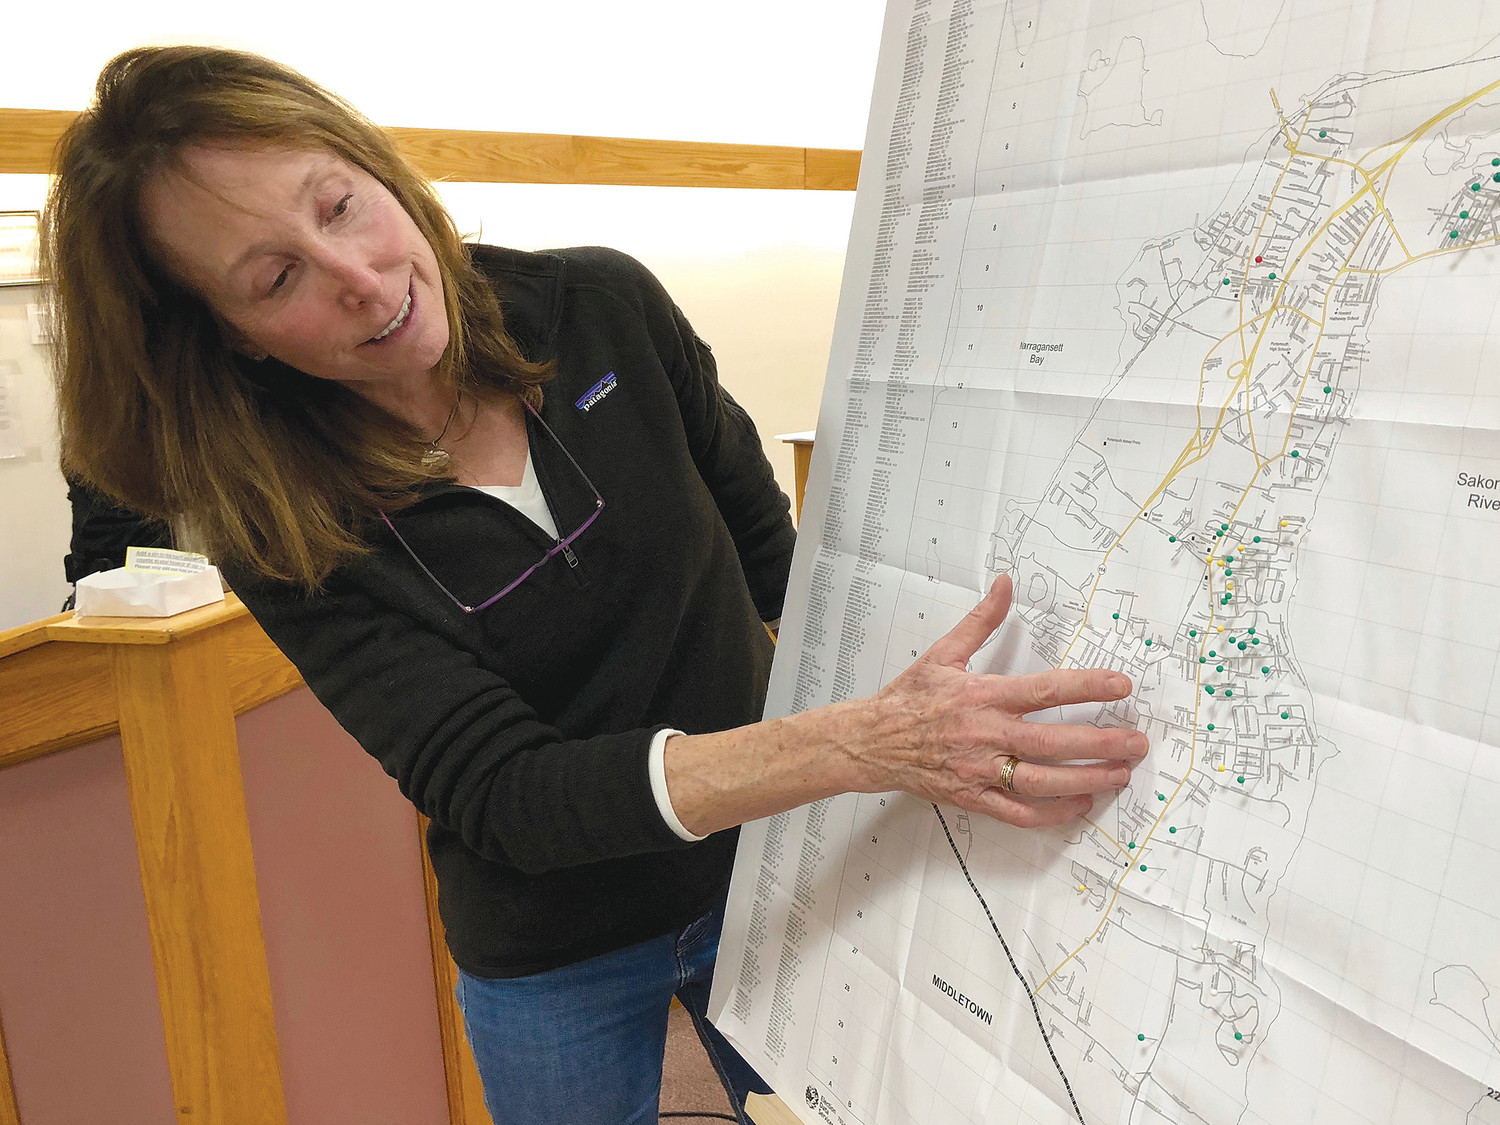 Numi Mitchell, lead scientist of the Narragansett Bay Coyote Study, points to an area on a Portsmouth map where the highest concentration of coyote sightings were reported to police over the past year.